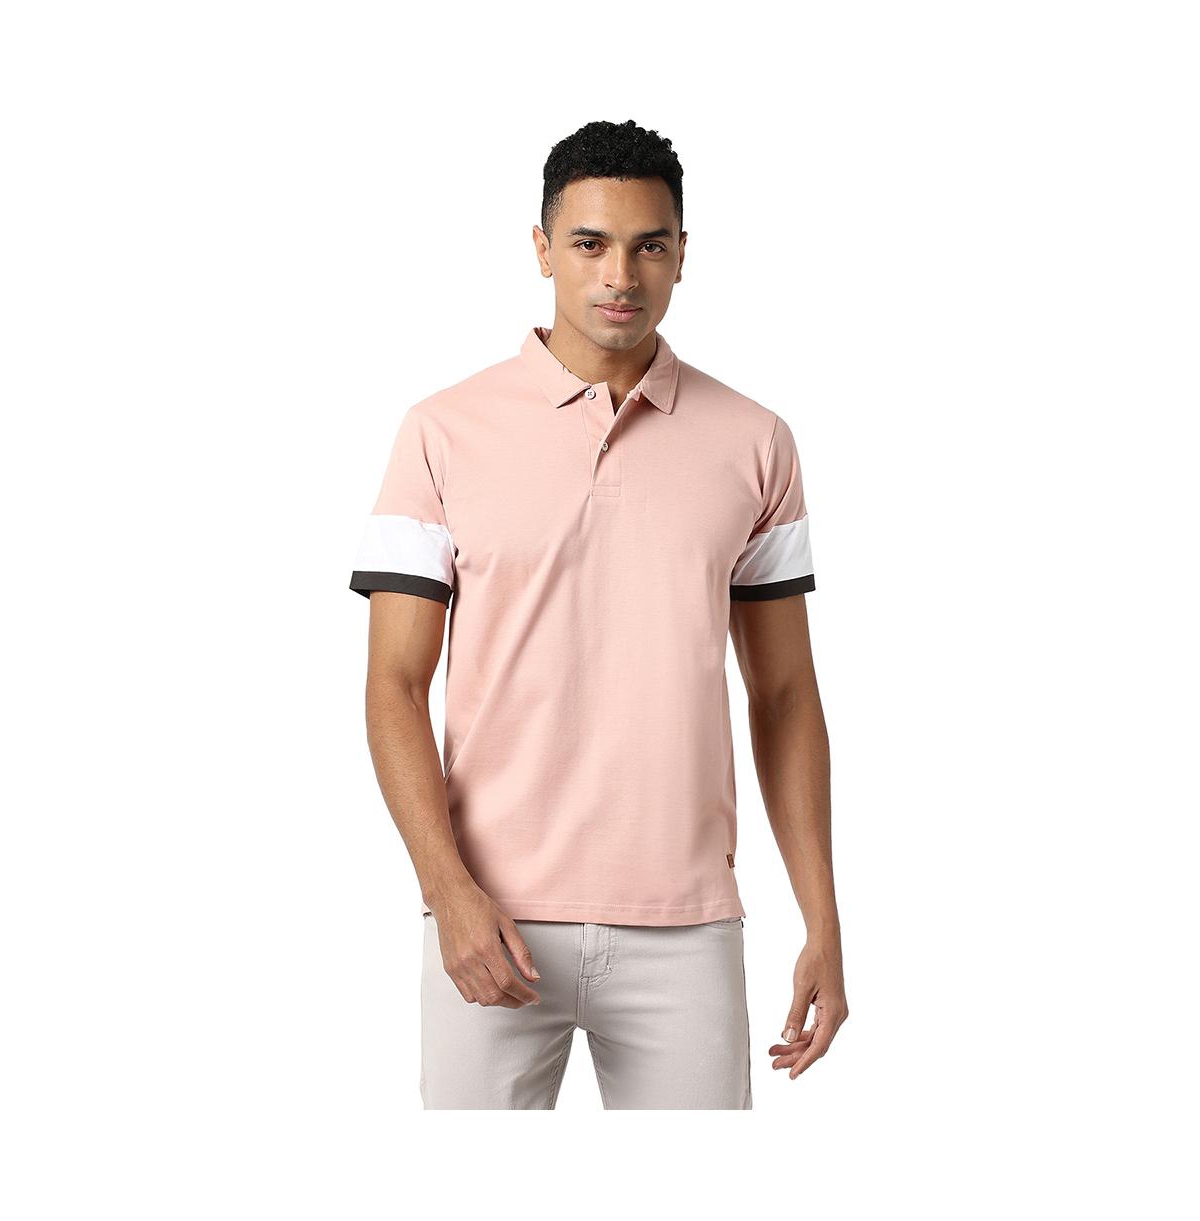 Men's Blush Pink Polo T-Shirt With Contrast Detail - Blush pink